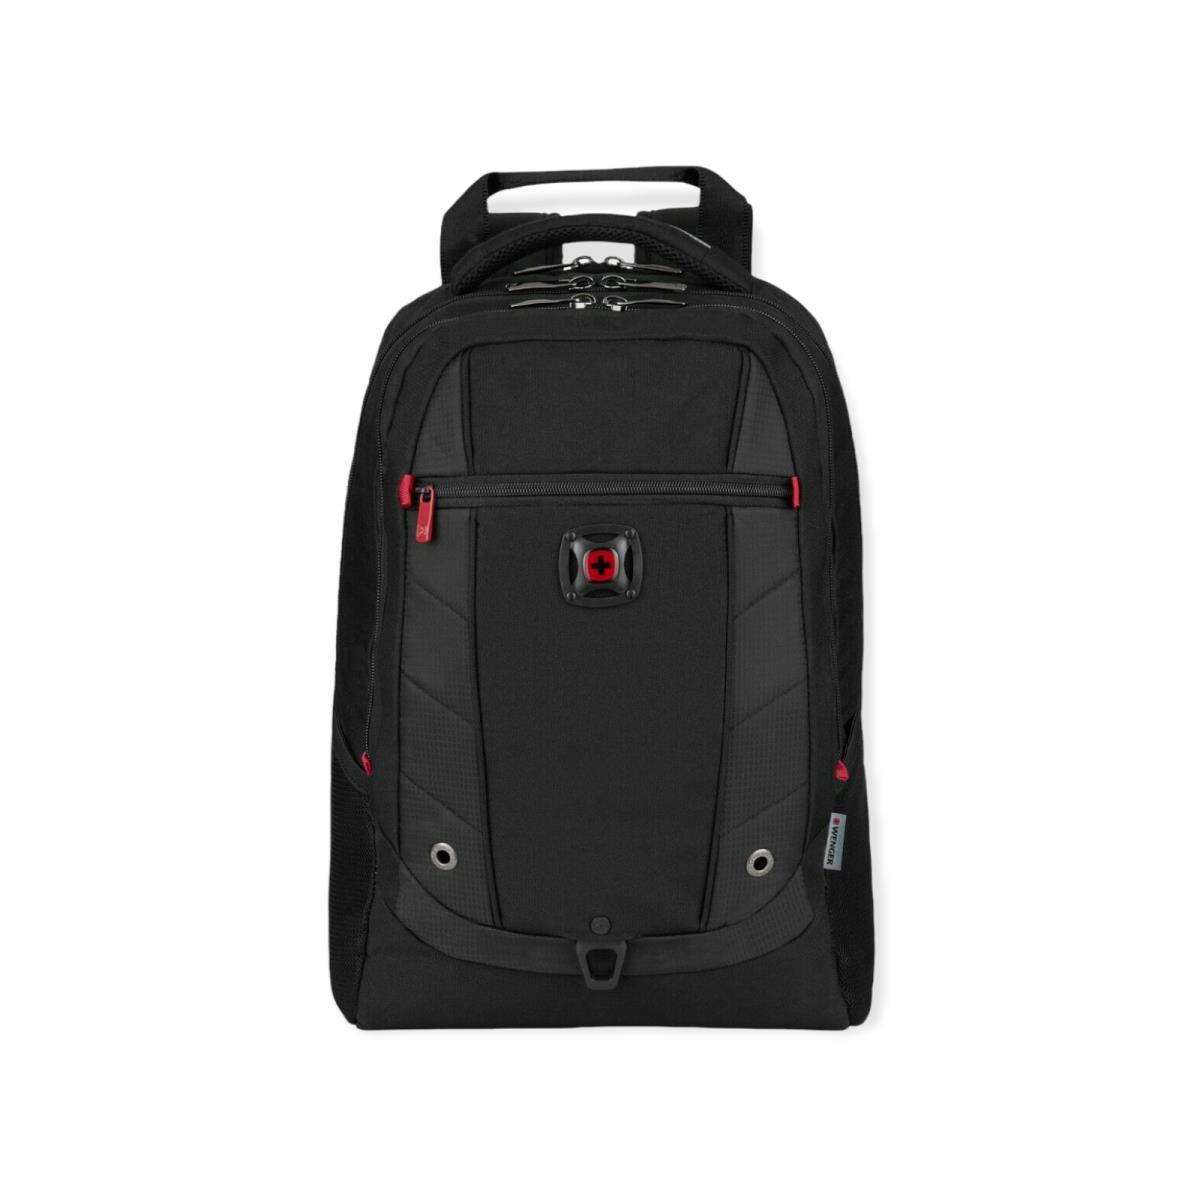 Wenger Sweesgear Vysionpoint Pro 21L 16`` Laptop Backpack